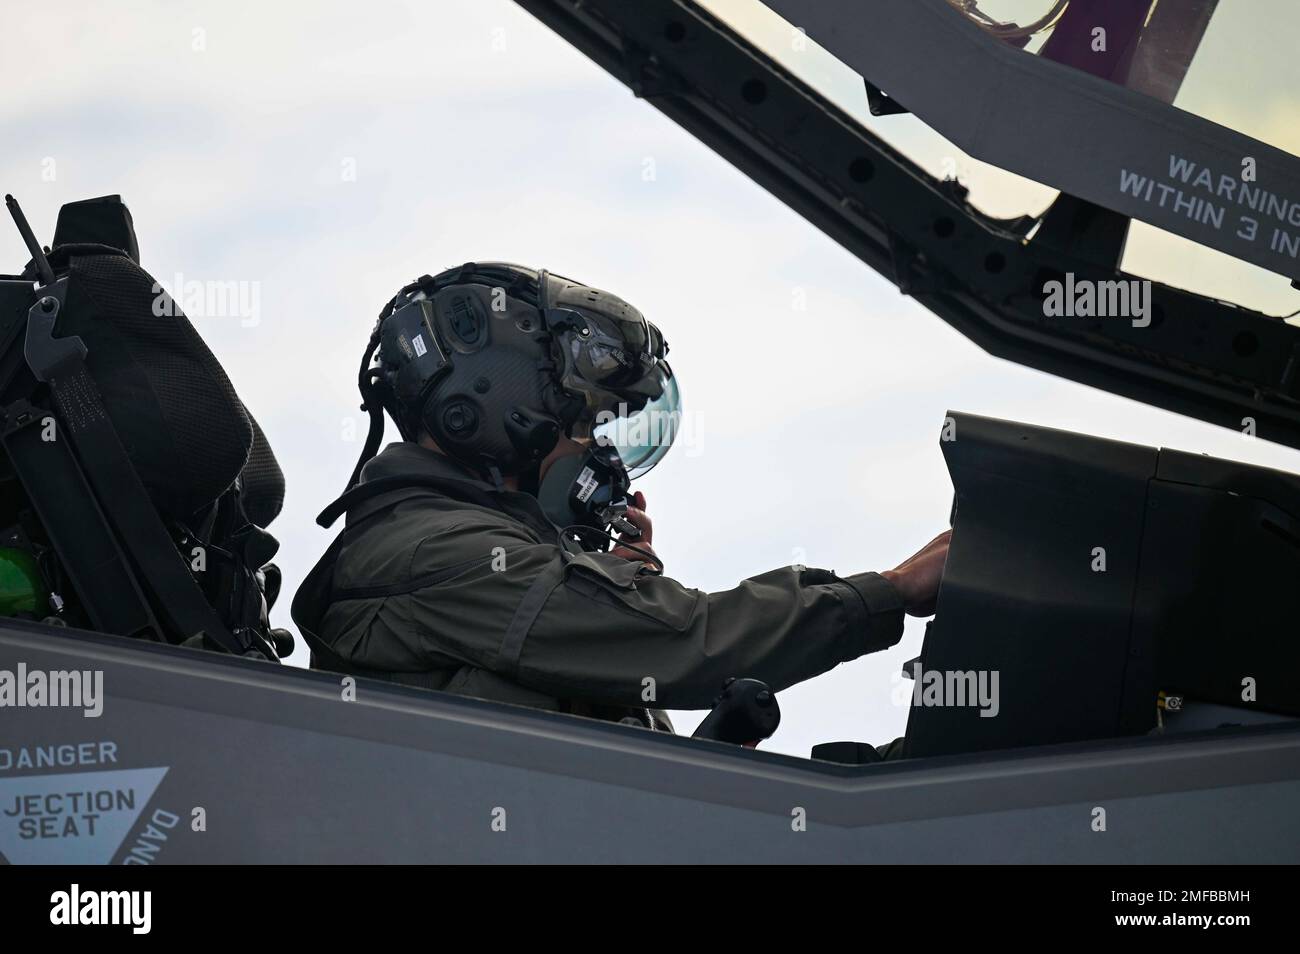 https://c8.alamy.com/comp/2MFBBMH/us-air-force-lt-col-chad-sebero-an-instructor-pilot-with-the-58th-fighter-squadron-33rd-fighter-wing-eglin-air-force-base-florida-prepares-to-fly-a-us-air-force-f-35a-lightning-ii-from-the-58th-fs-33rd-fw-eglin-afb-during-exercise-northern-lightning-at-volk-field-air-national-guard-base-wisconsin-aug-18-2022-nomads-with-the-33rd-fw-traveled-to-volk-field-which-offers-an-open-airspace-with-optimal-weather-conditions-for-flying-allowing-the-33rd-fw-to-avoid-over-60-of-seasonal-lightning-and-hurricane-delays-in-florida-2MFBBMH.jpg